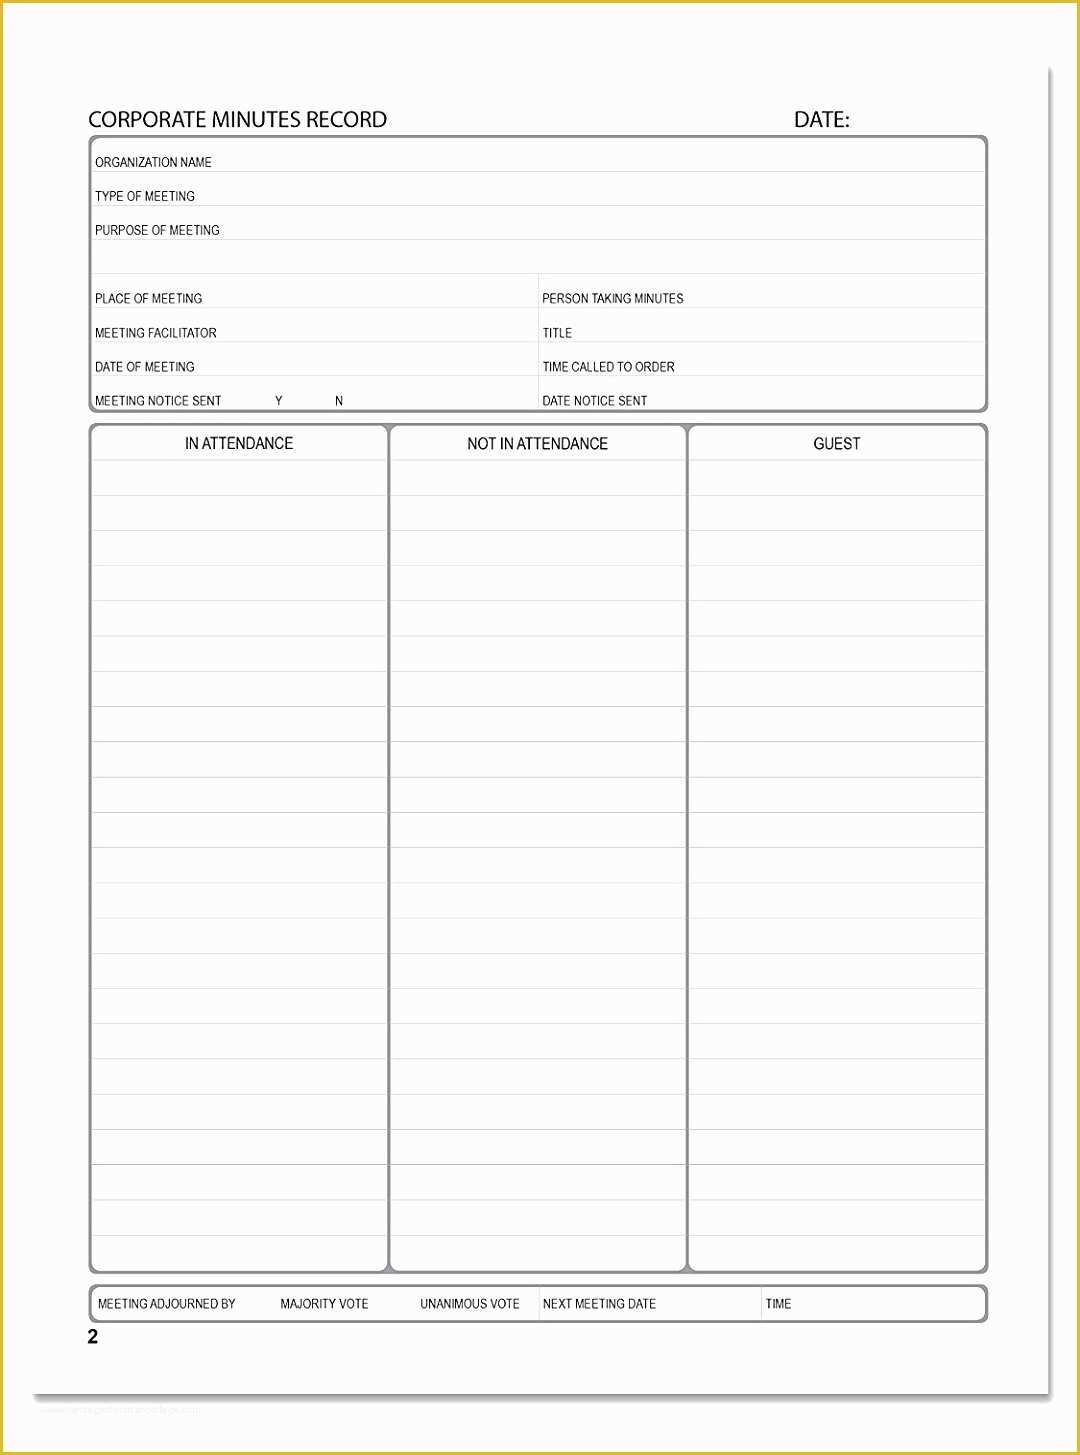 Free Corporate Minute Book Template Of 6 Corporate Minute Book Template Yayui